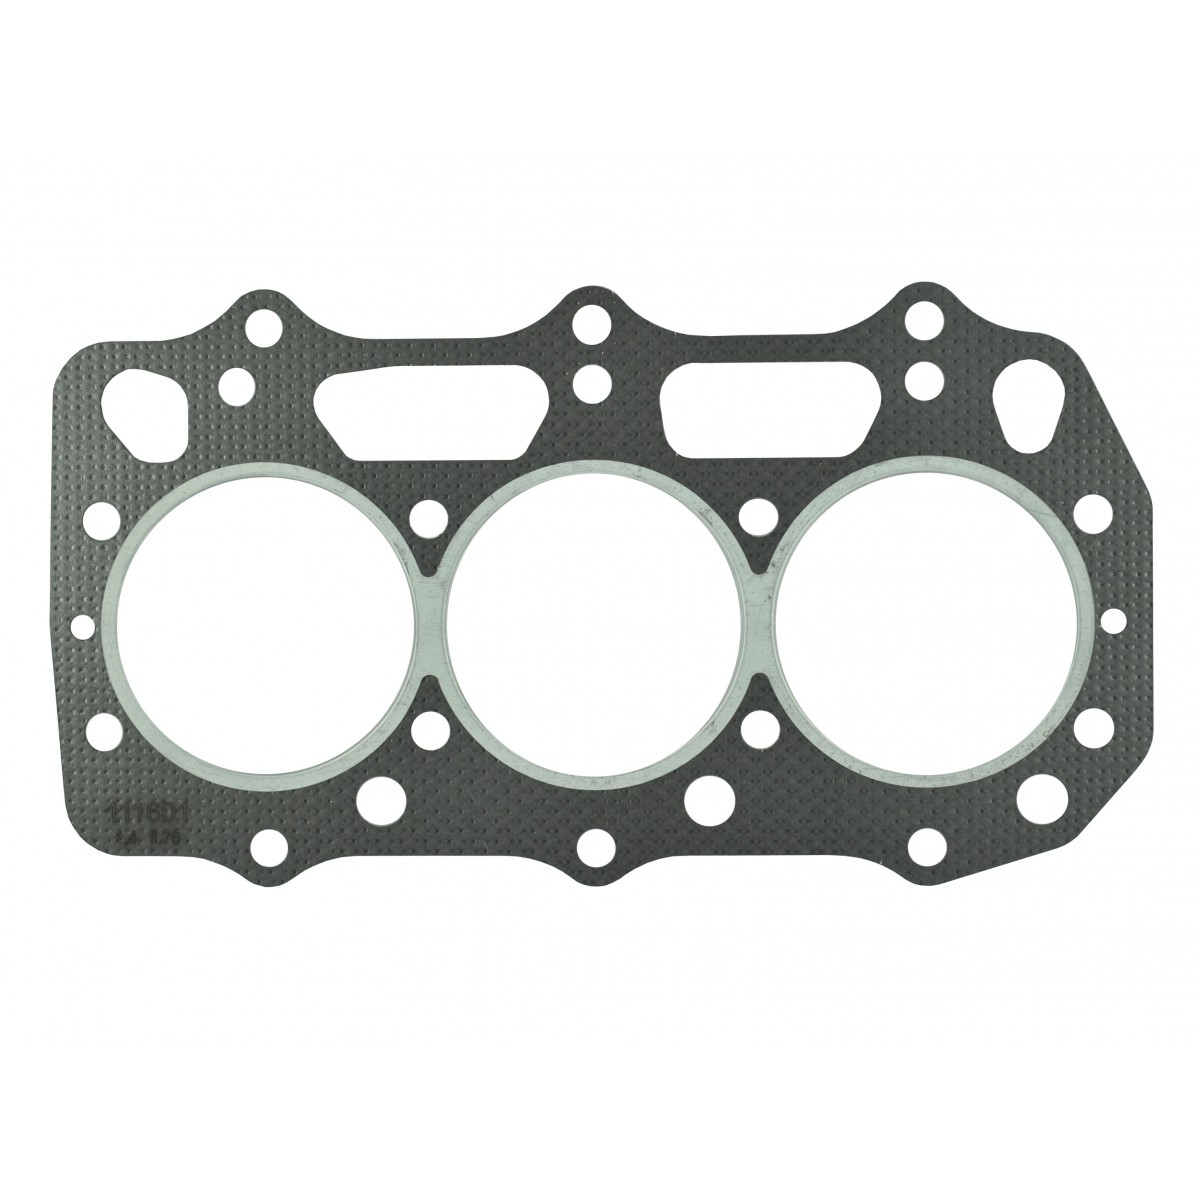 Gasket for Shibaura S753 heads, 76 mm piston, Shibaura P17F and others